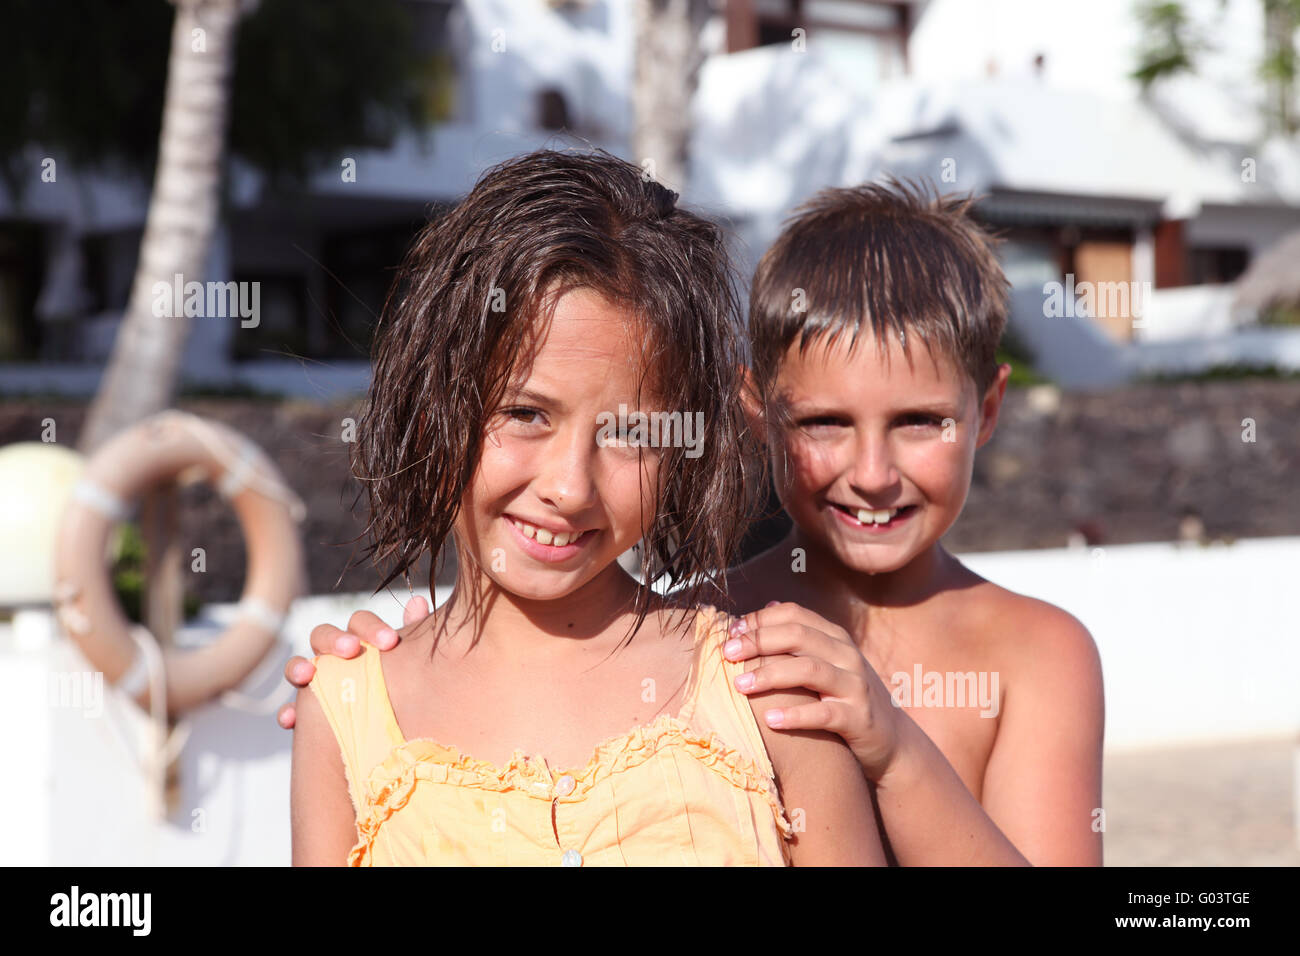 boy and girl playing near pool Stock Photo